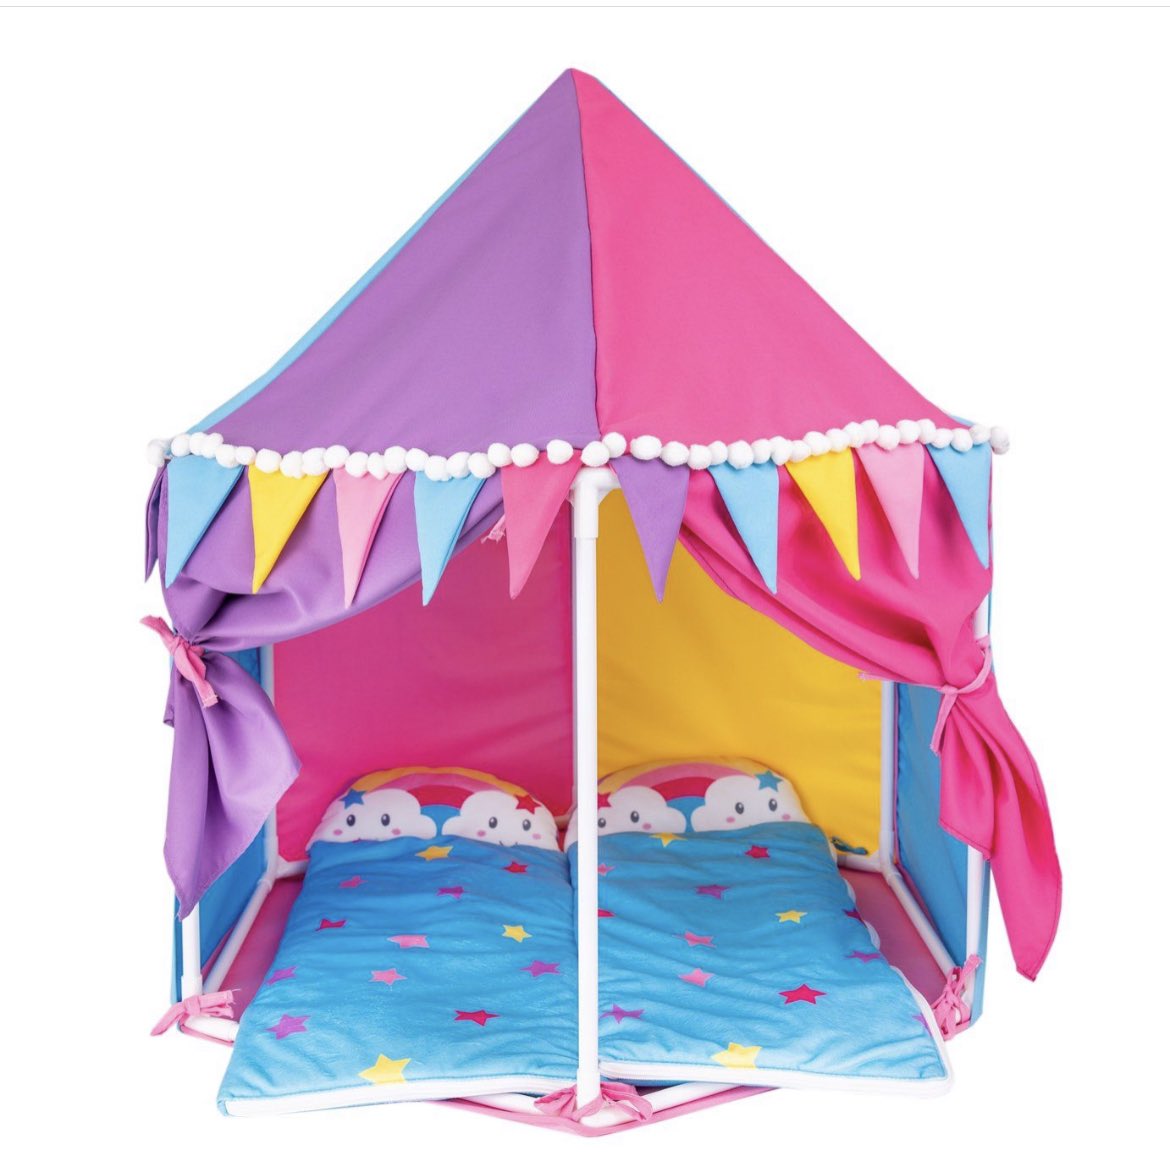 What if we napped together in the Designafriend festival glamping tent from Argos.